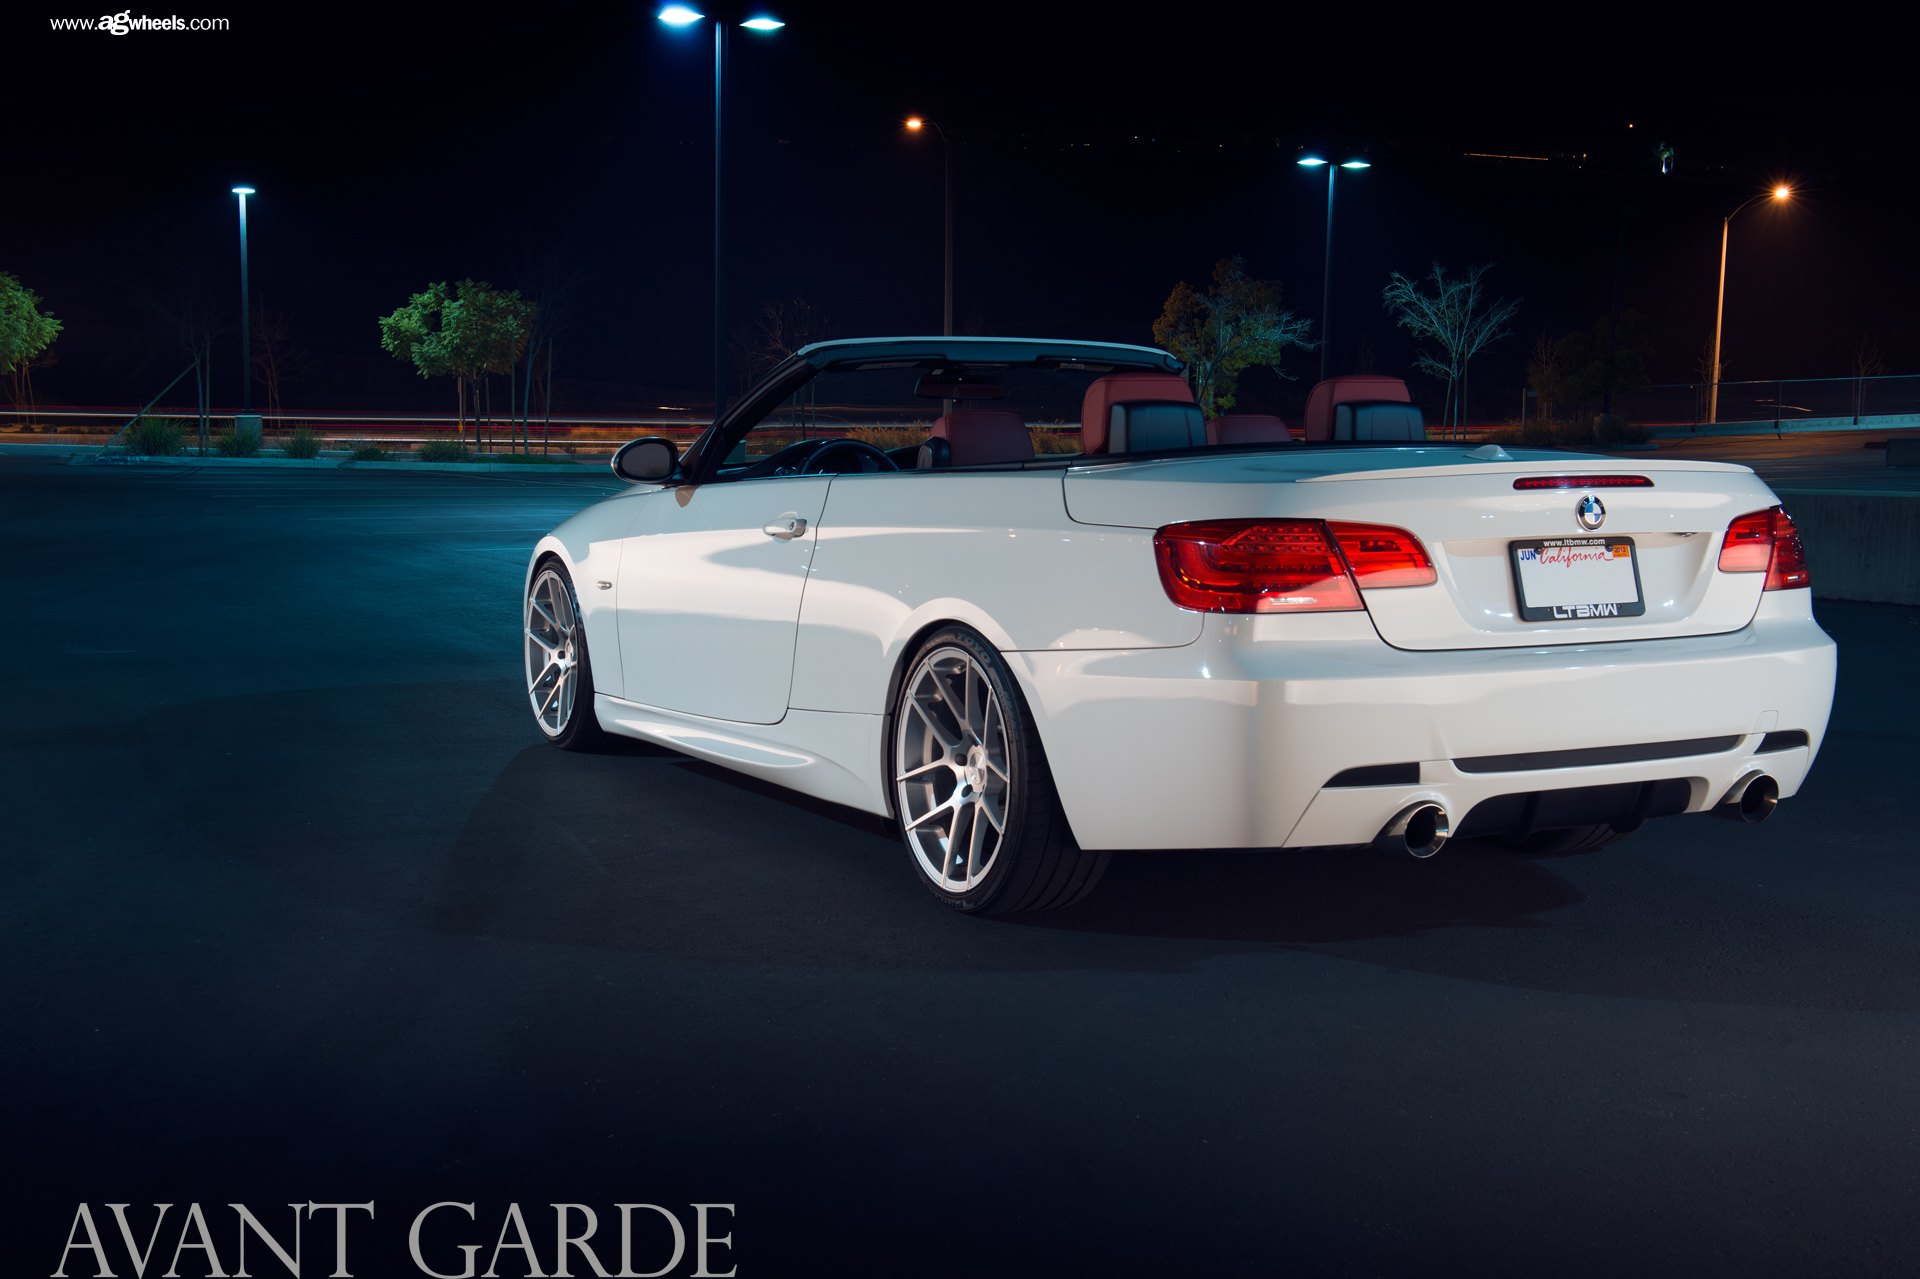 Red LED Taillights on White Convertible BMW 3-Series - Photo by Avant Garde Wheels